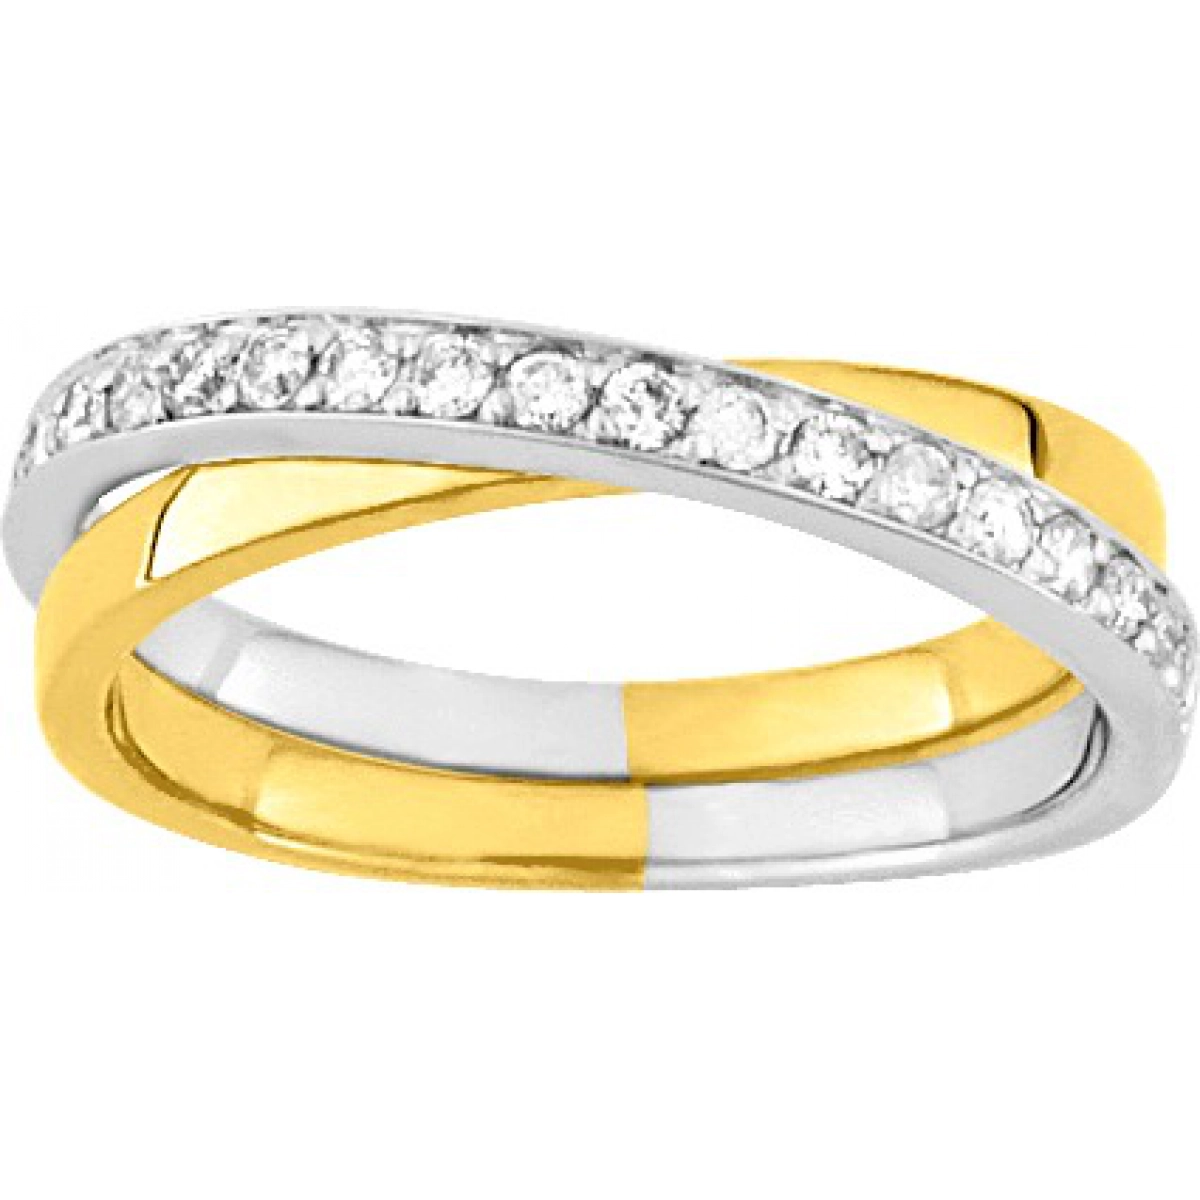 All.croisée 19 di 0.27ct or750jb - Taille: 56  Lua Blanca  3R001XB4.16